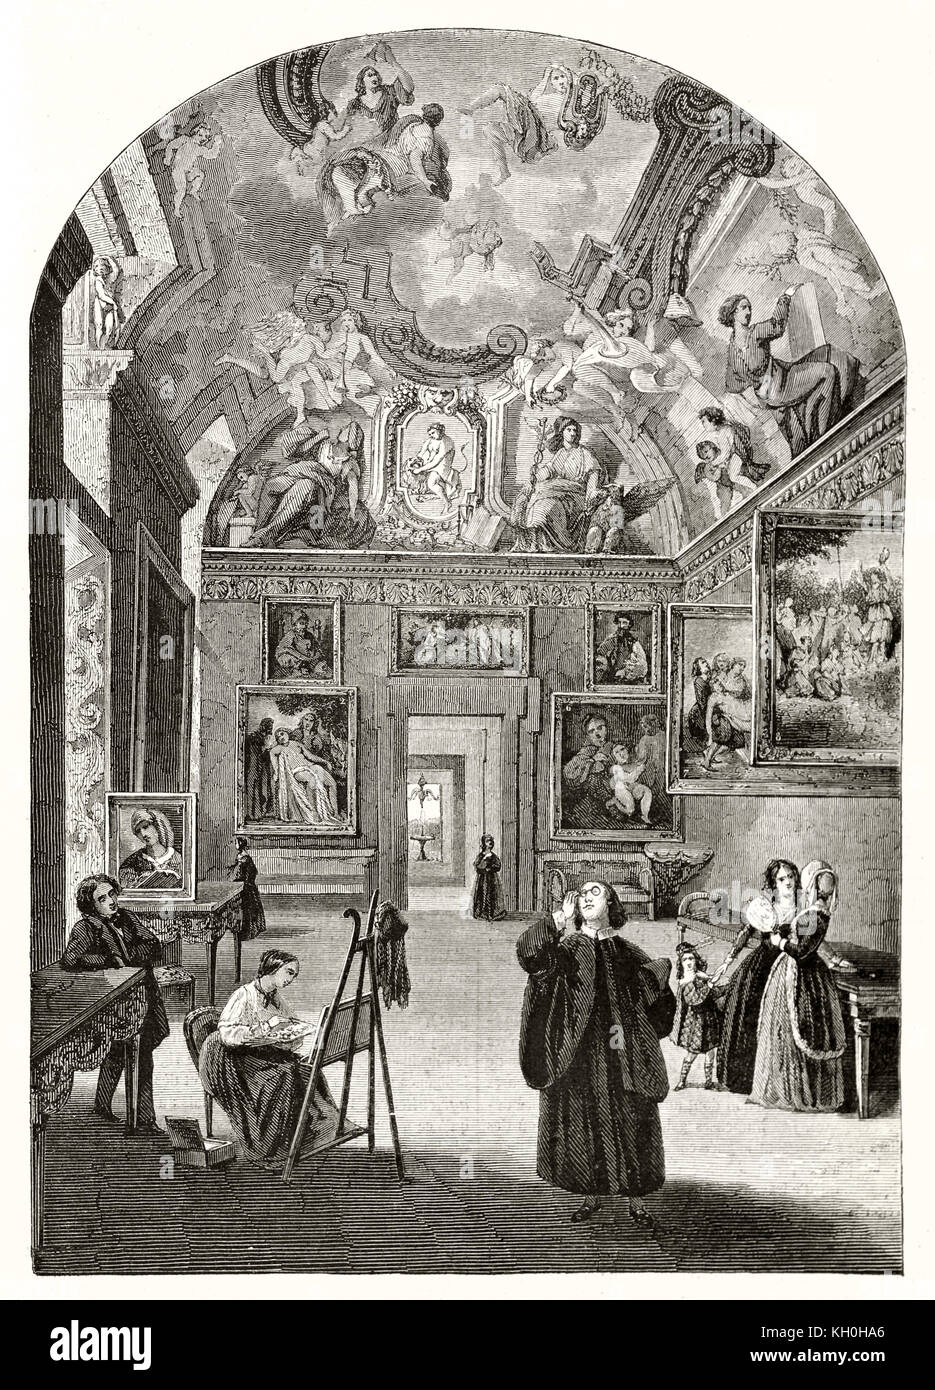 Old illustration of Galleria Borghese hall, Rome, Italy. After Frappas and Freeman, publ. on Magasin Pittoresque, Paris, 1847. Stock Photo